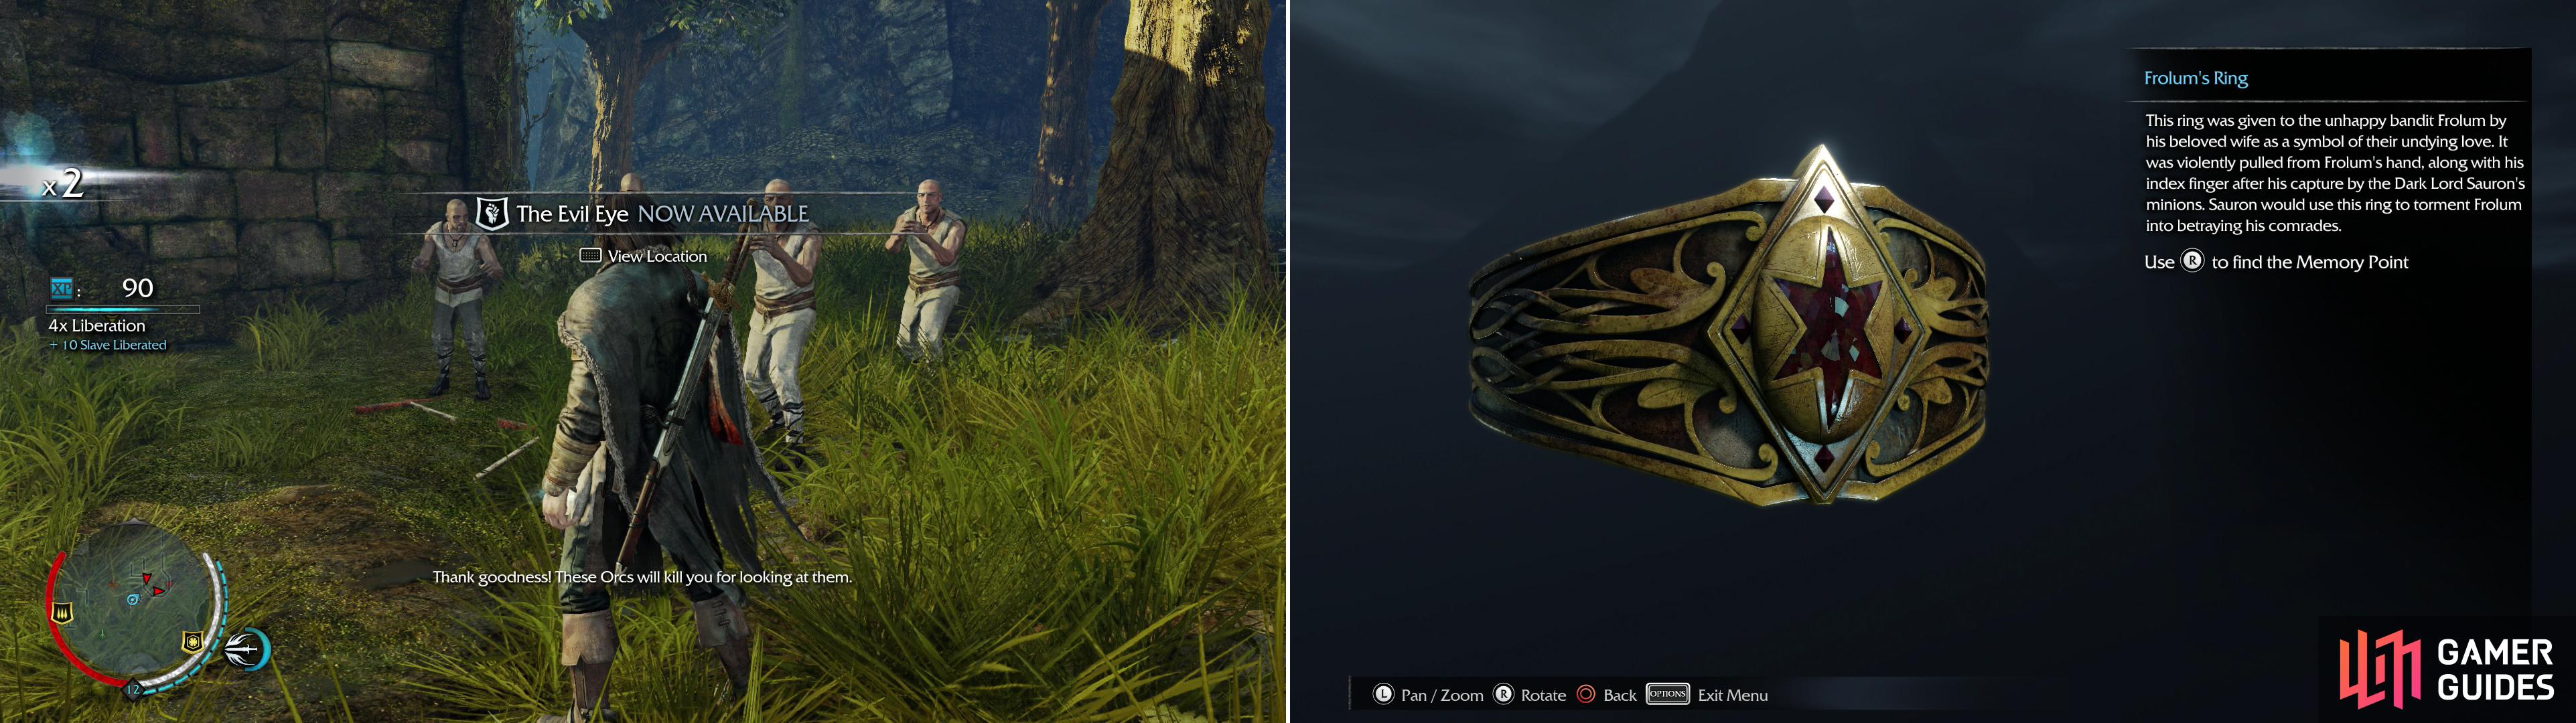 Men in Nurn are as oppressed by the Uruks as the ones in Udun (left). Pick up the Frolum’s Ring artifact to finish up the Harad Basin (right).